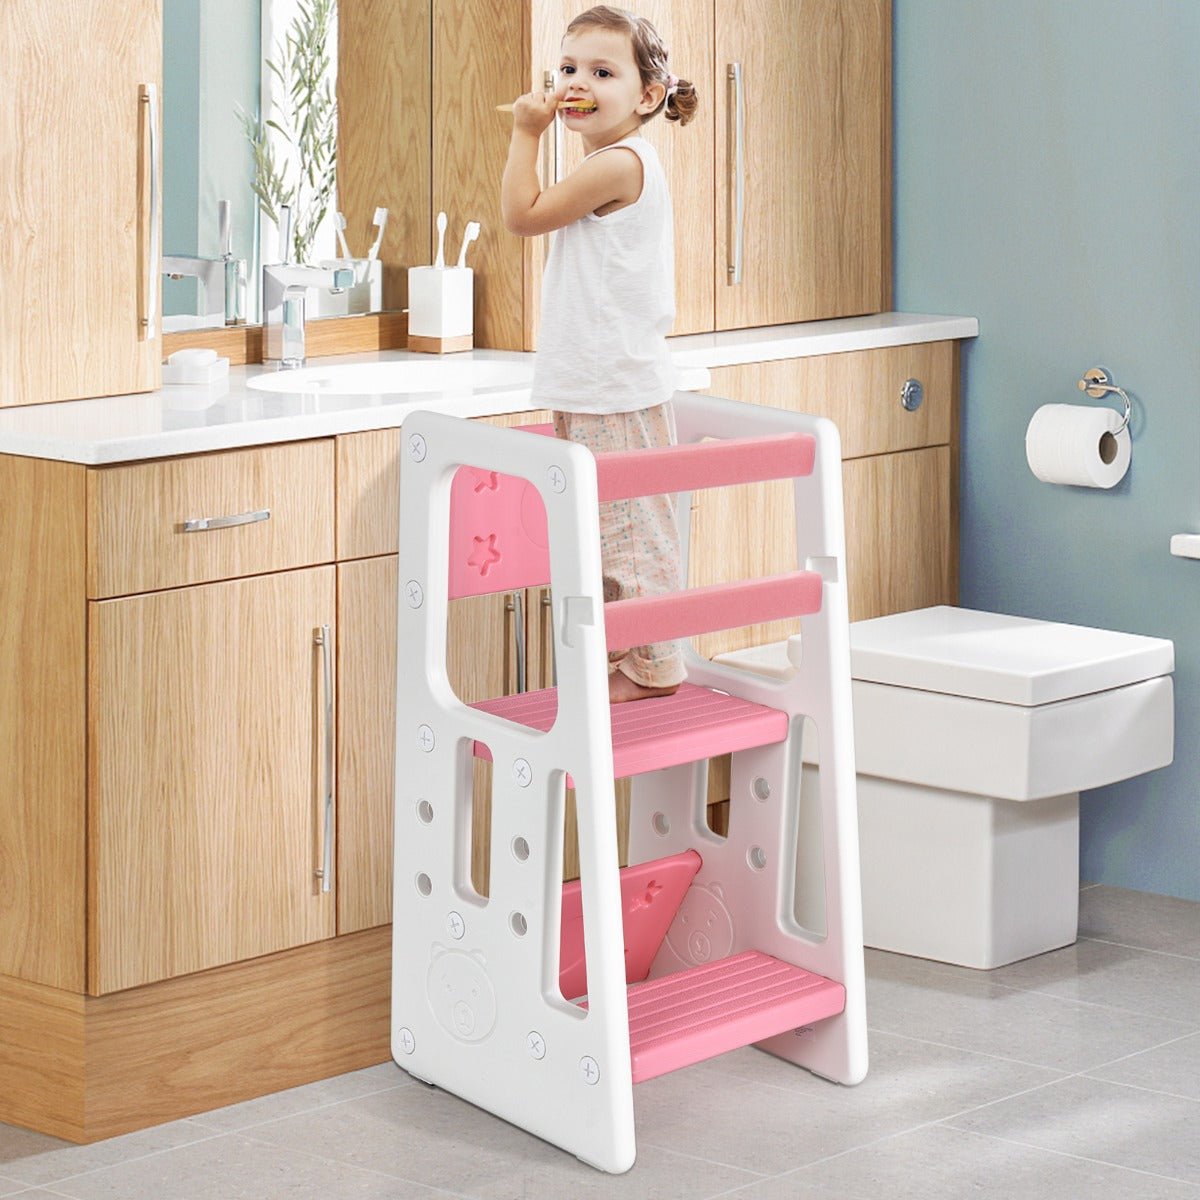 Kids Learning Helper Stool - Dual Safety Rails - Foster Autonomy